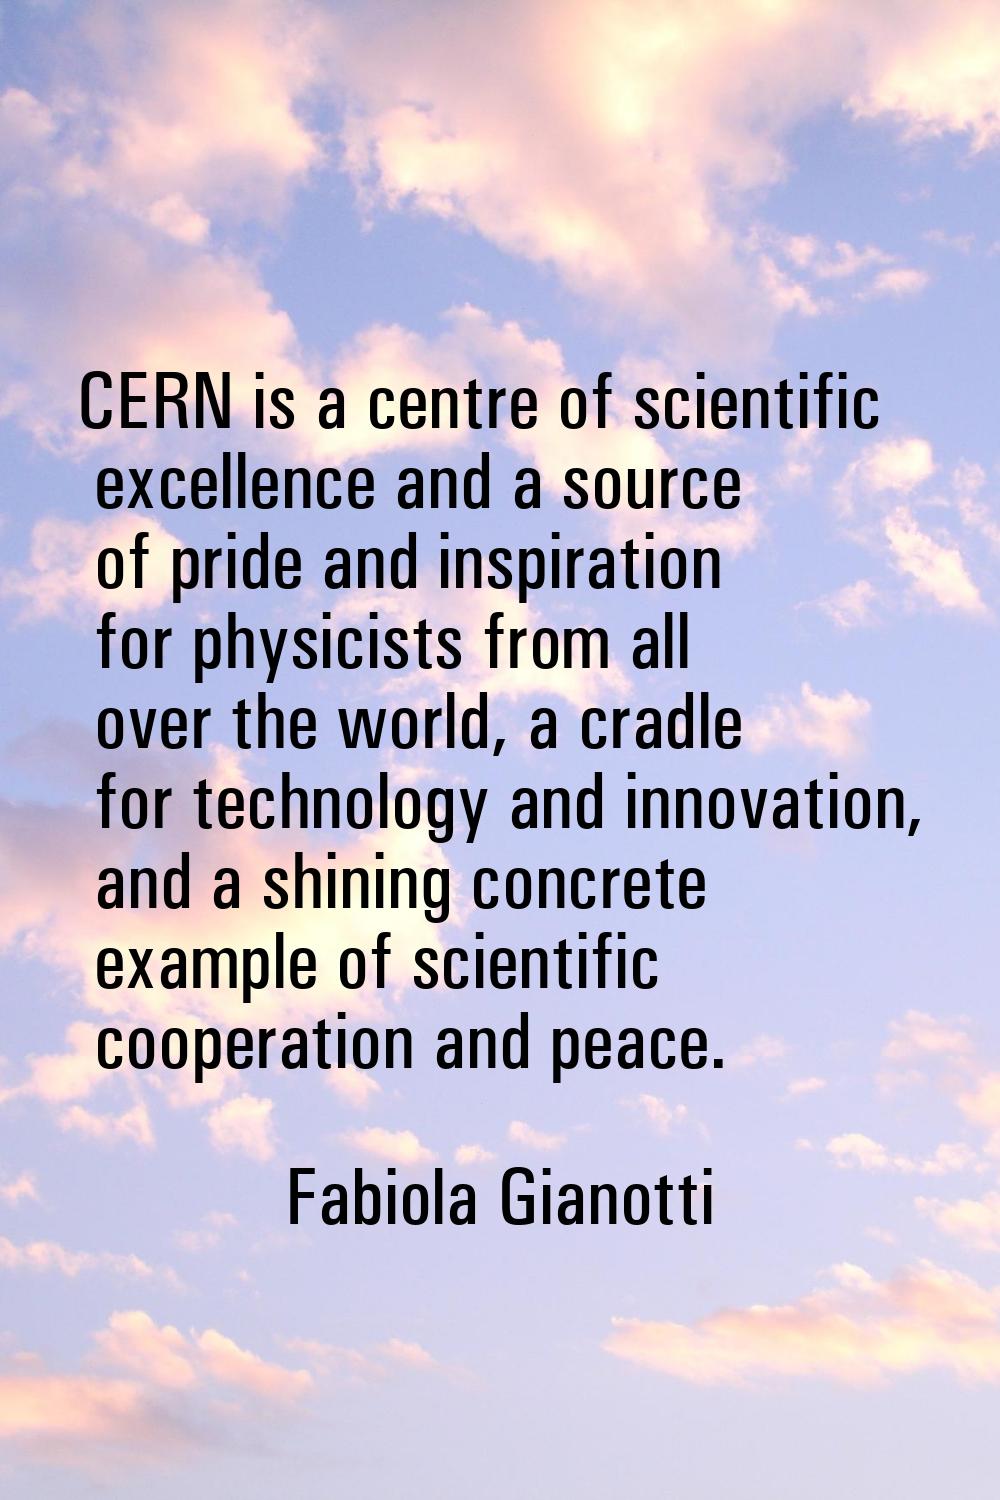 CERN is a centre of scientific excellence and a source of pride and inspiration for physicists from